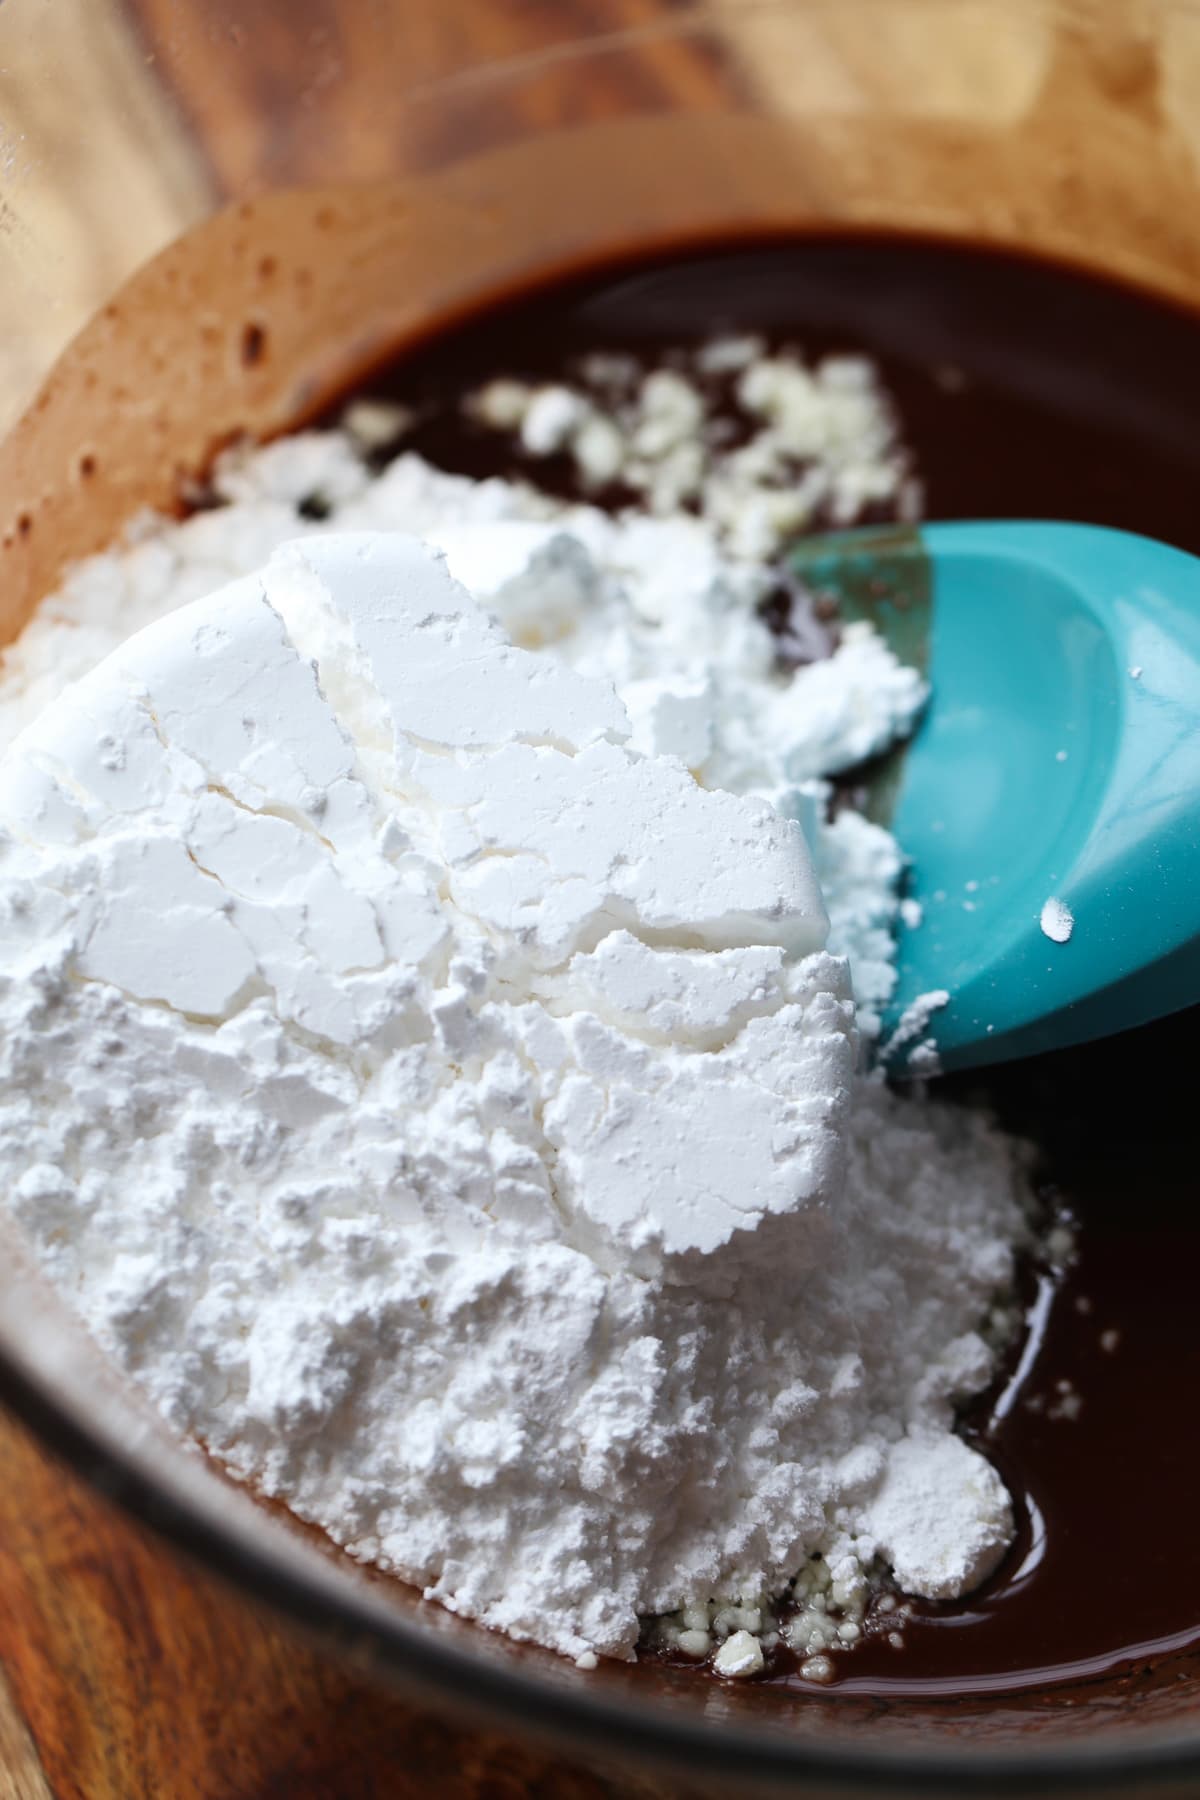 Adding powdered sugar to chocolate cake batter in a mixing bowl